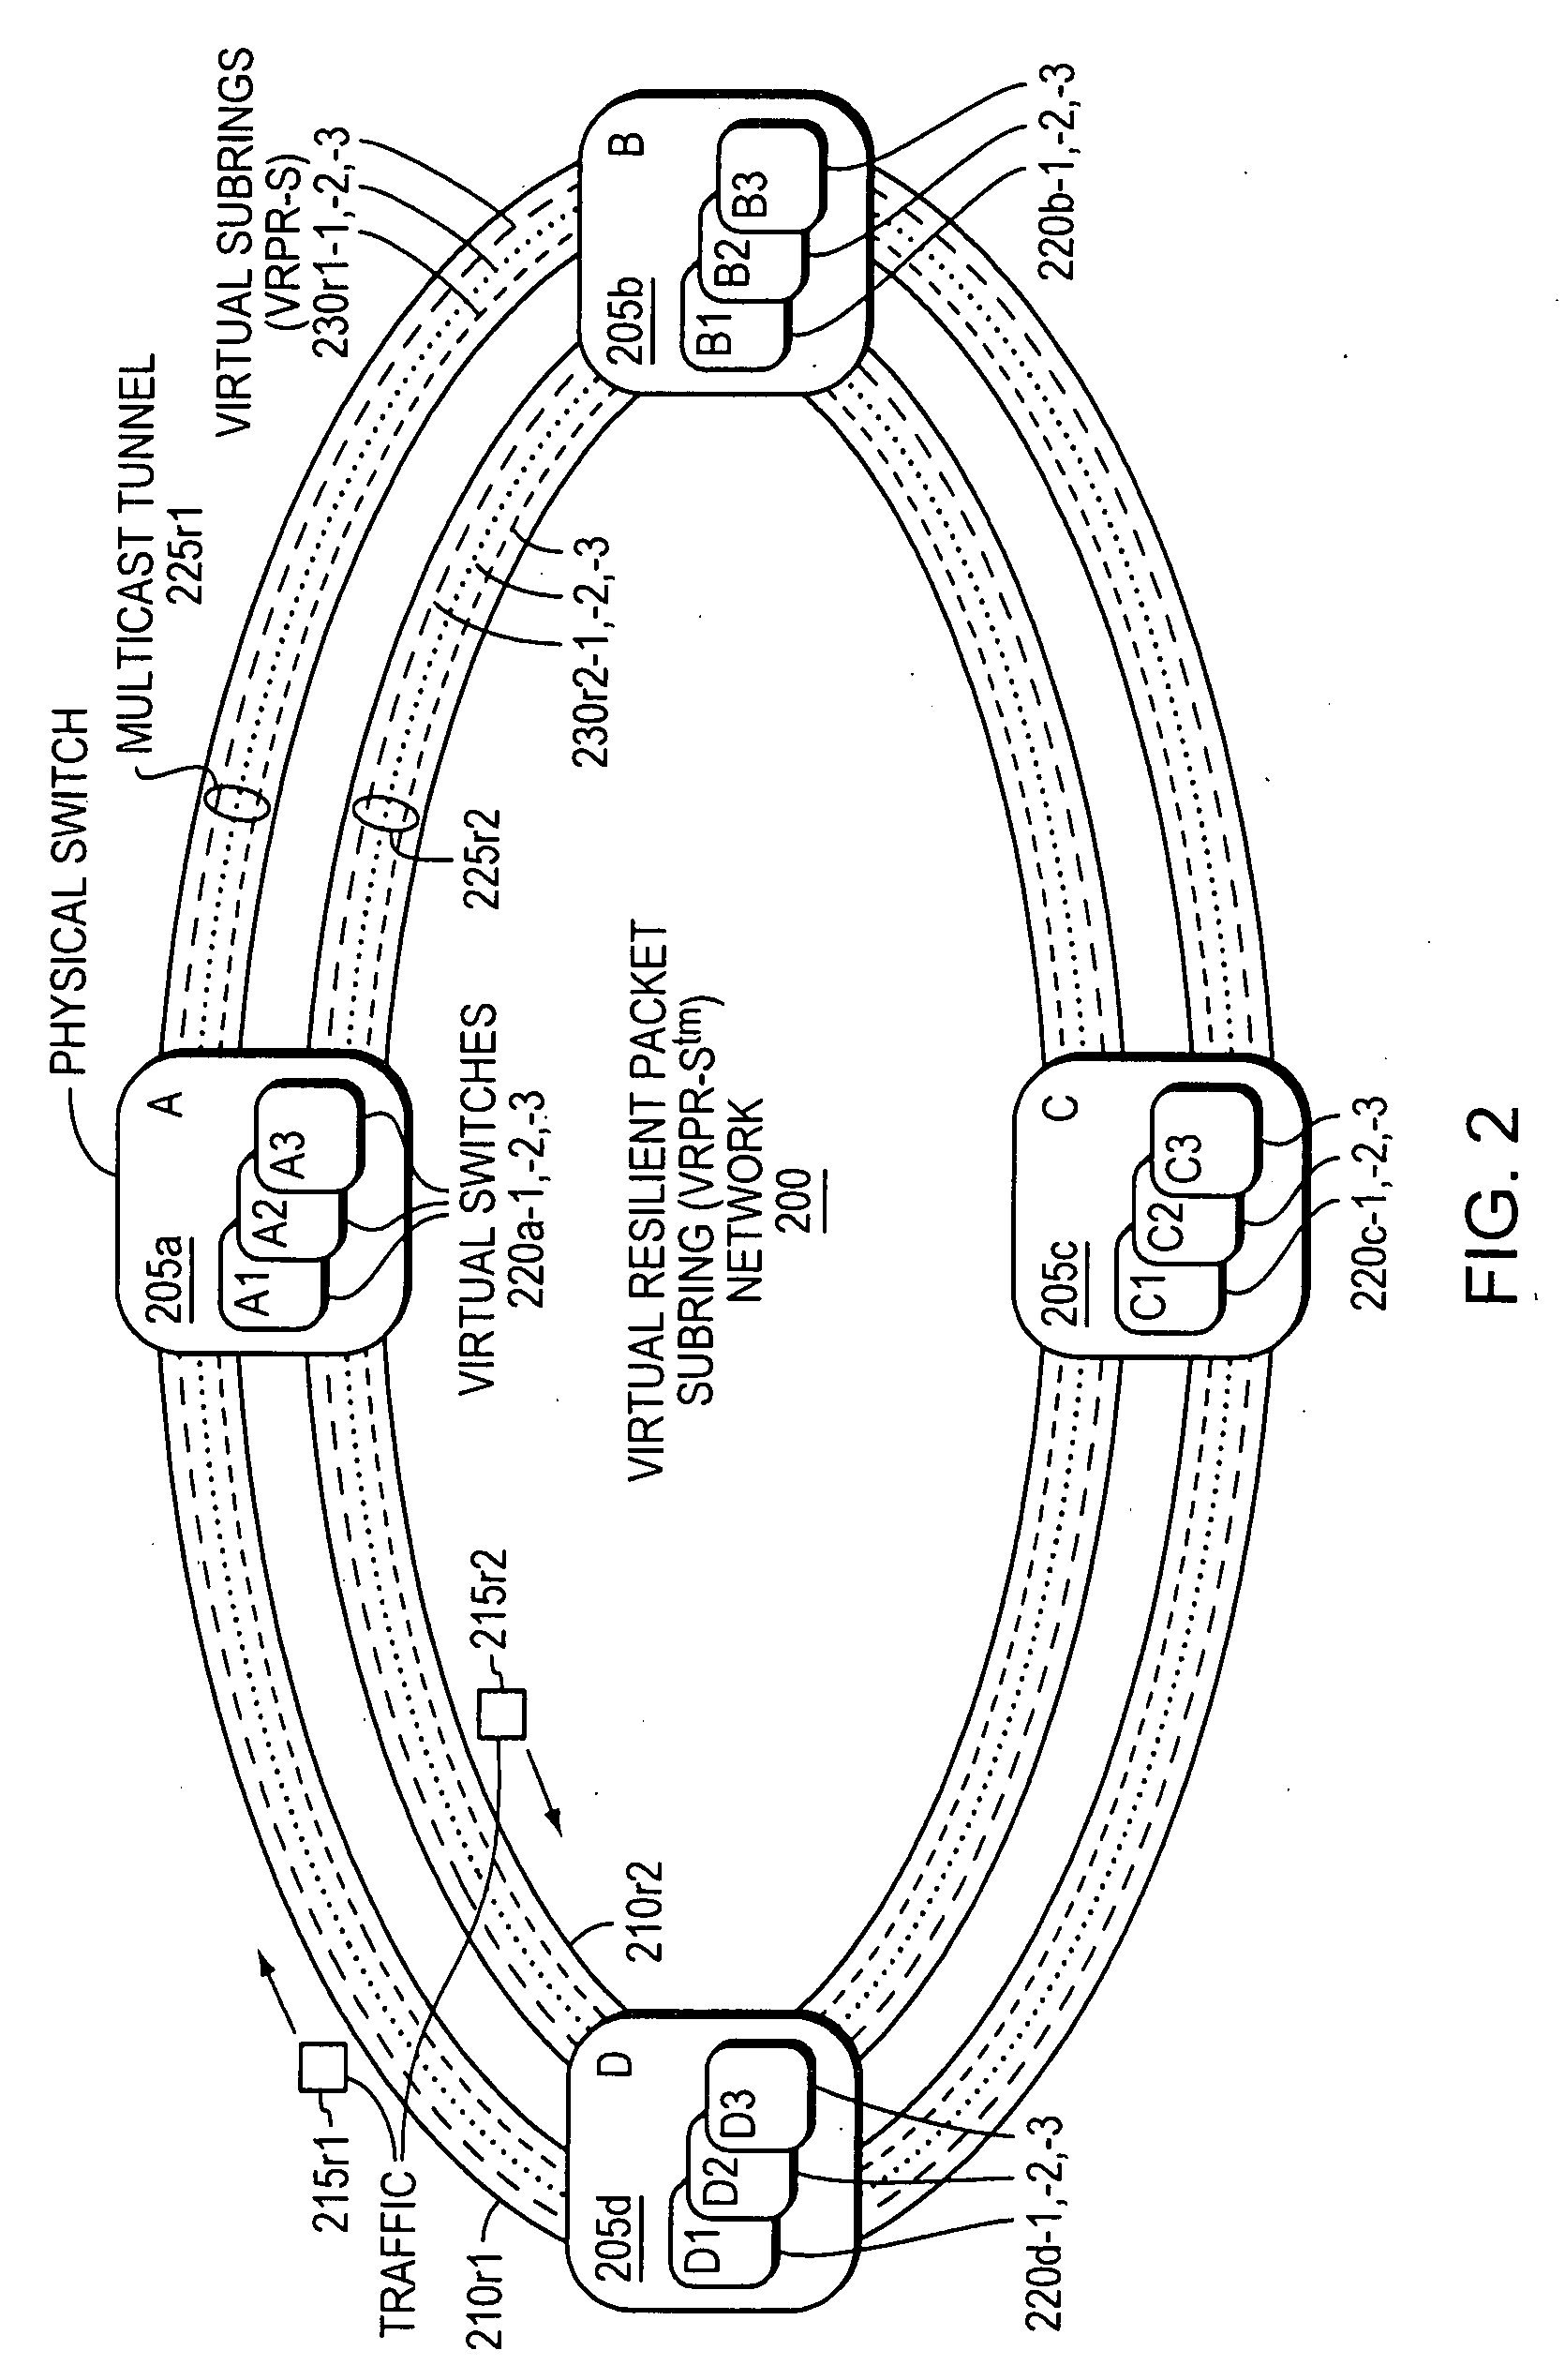 Method and apparatus for establishing virtual resilient packet ring (RPR) subrings over a common communications path